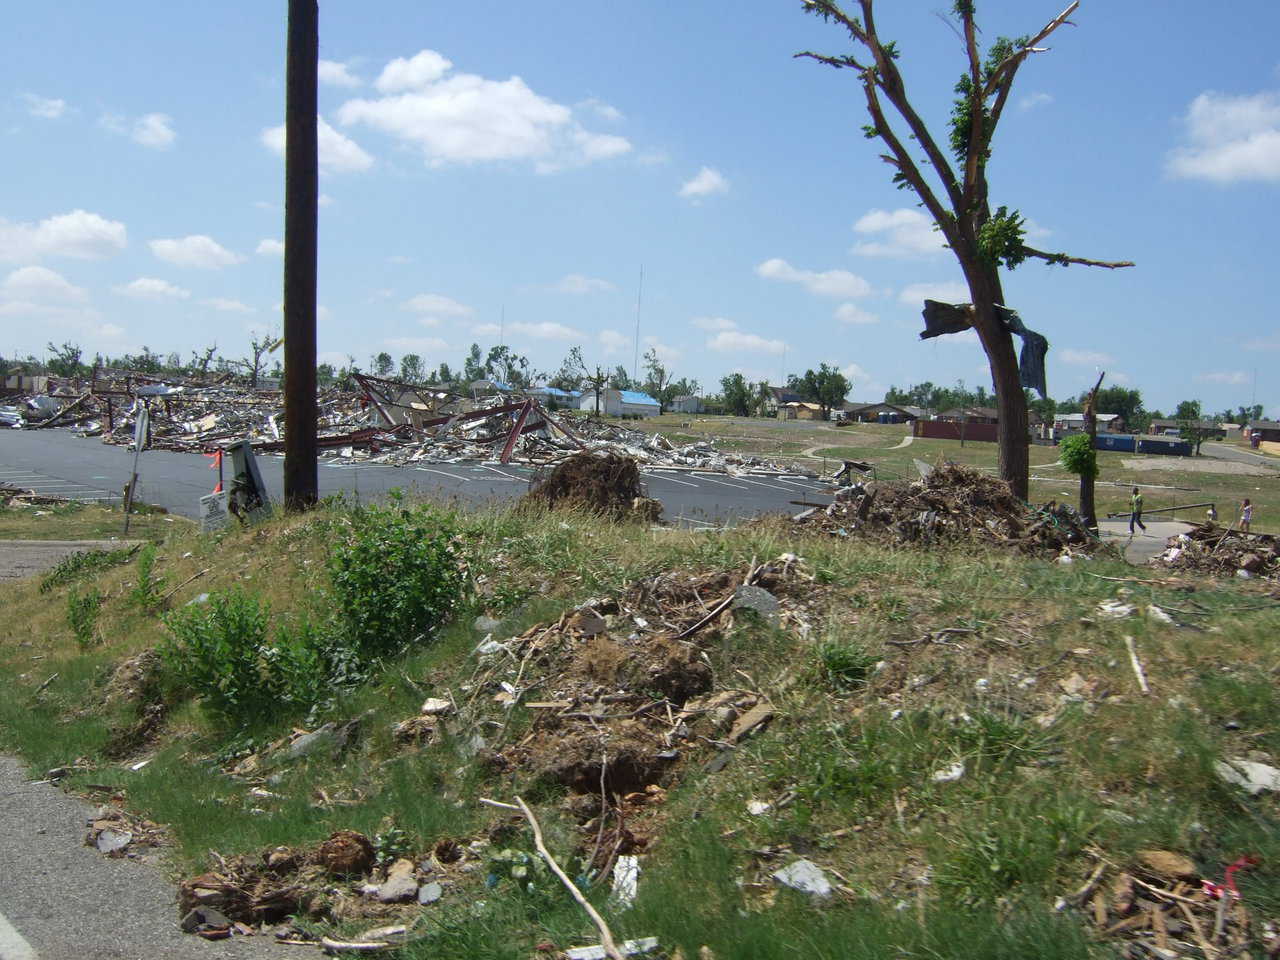 Houses in the background are covered with blue tarps. Although not destroyed, they received severe damage.